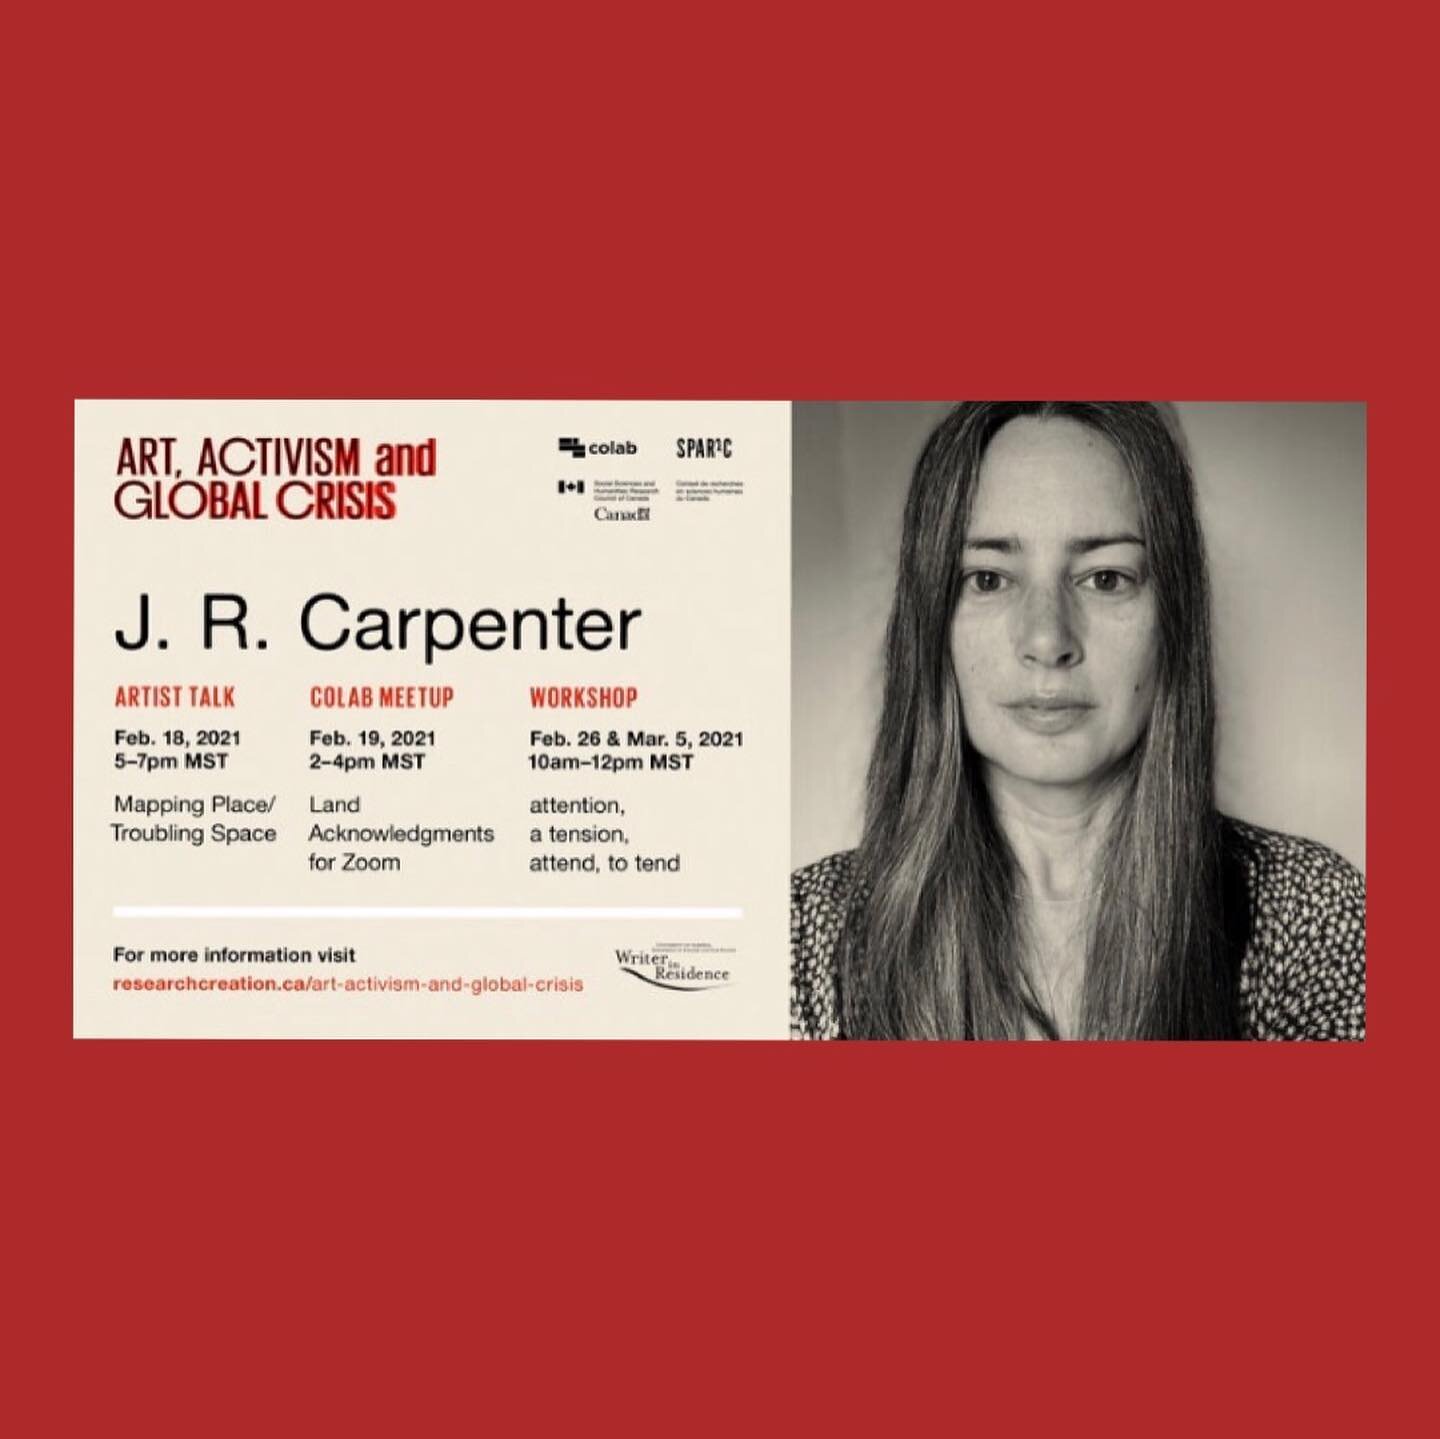 For the month of February, as part of the @researchcreation 2021 Art, Activism, and Global Crisis Speaker Series,  @jrcarpenter will be leading the discussion and workshop!
.
Please register via eventbrite in  the link found at RESEARCHCREATION.ca
.
